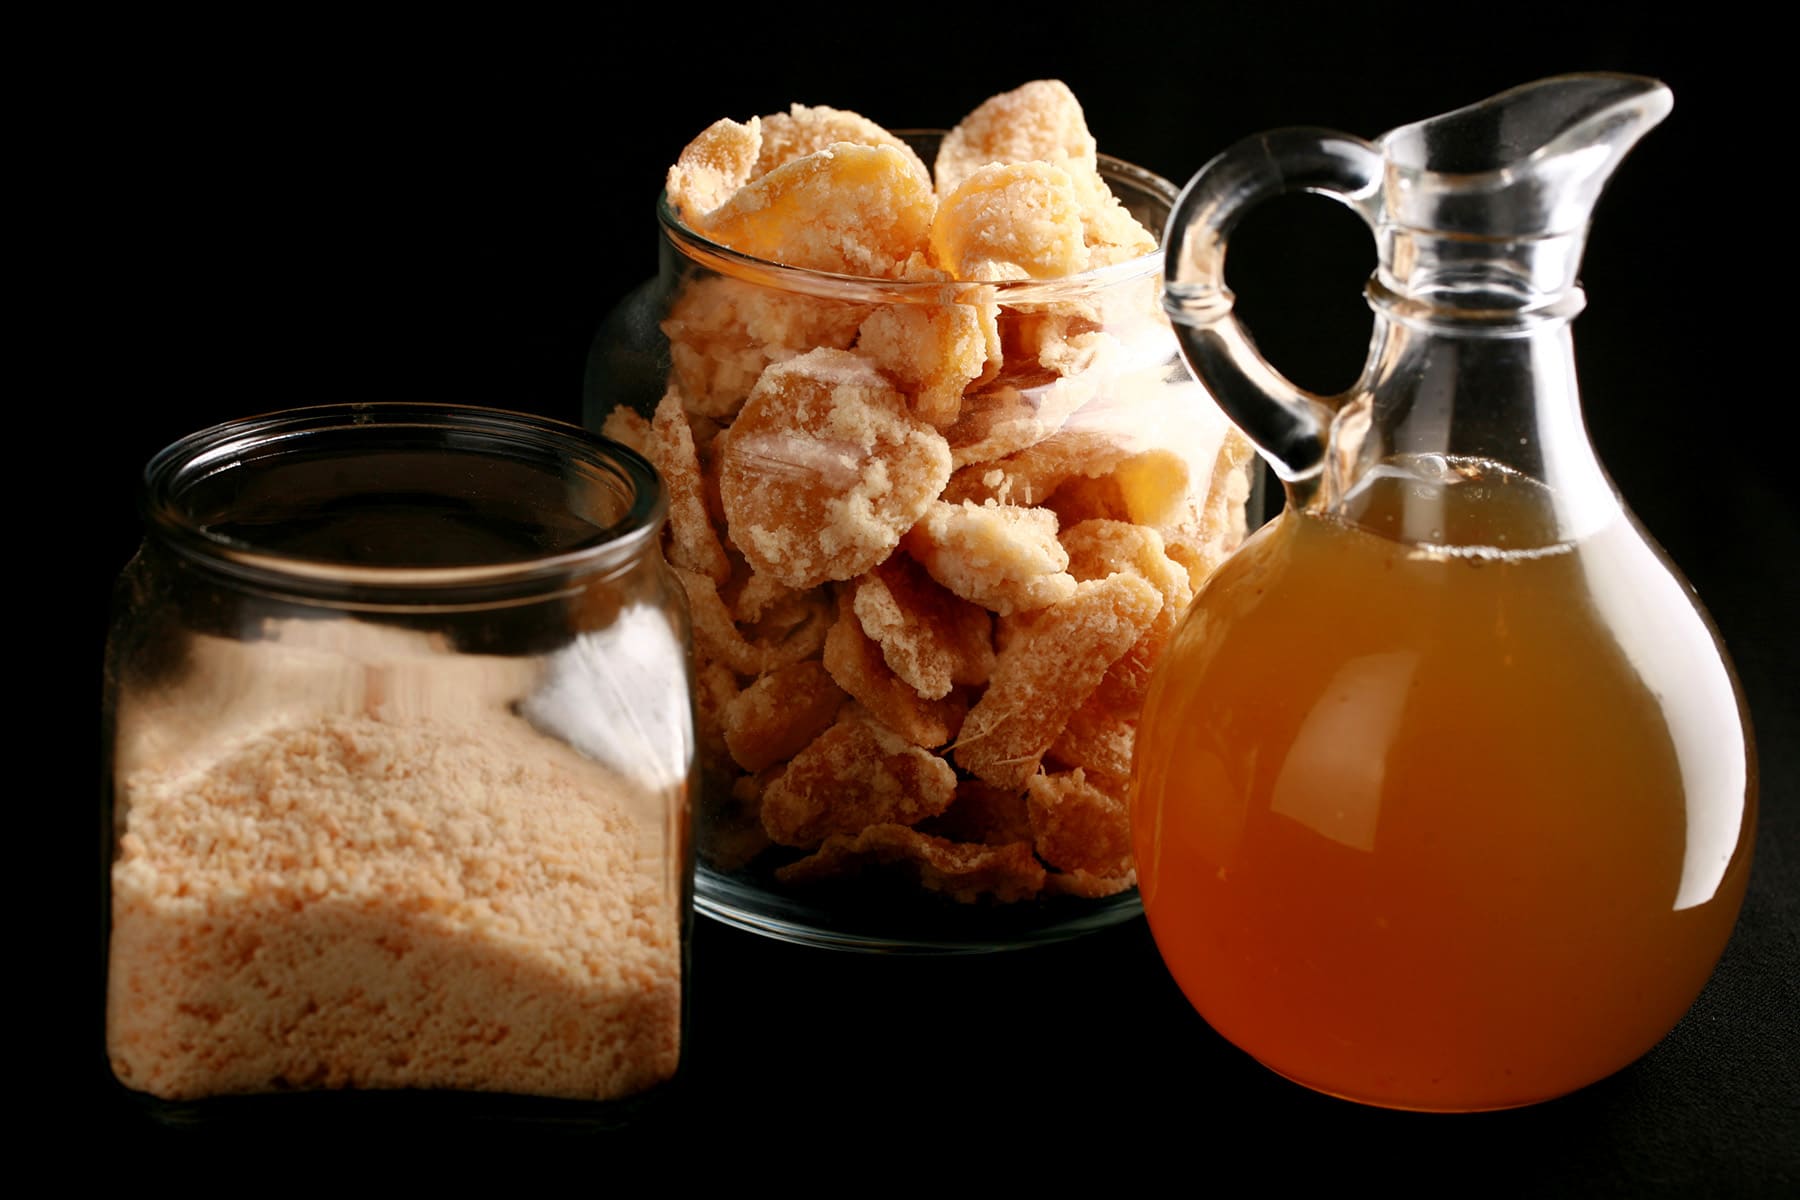 A glass jar of ginger sugar, a taller glass jar filled with candied ginger, and a small bottle of ginger syrup.